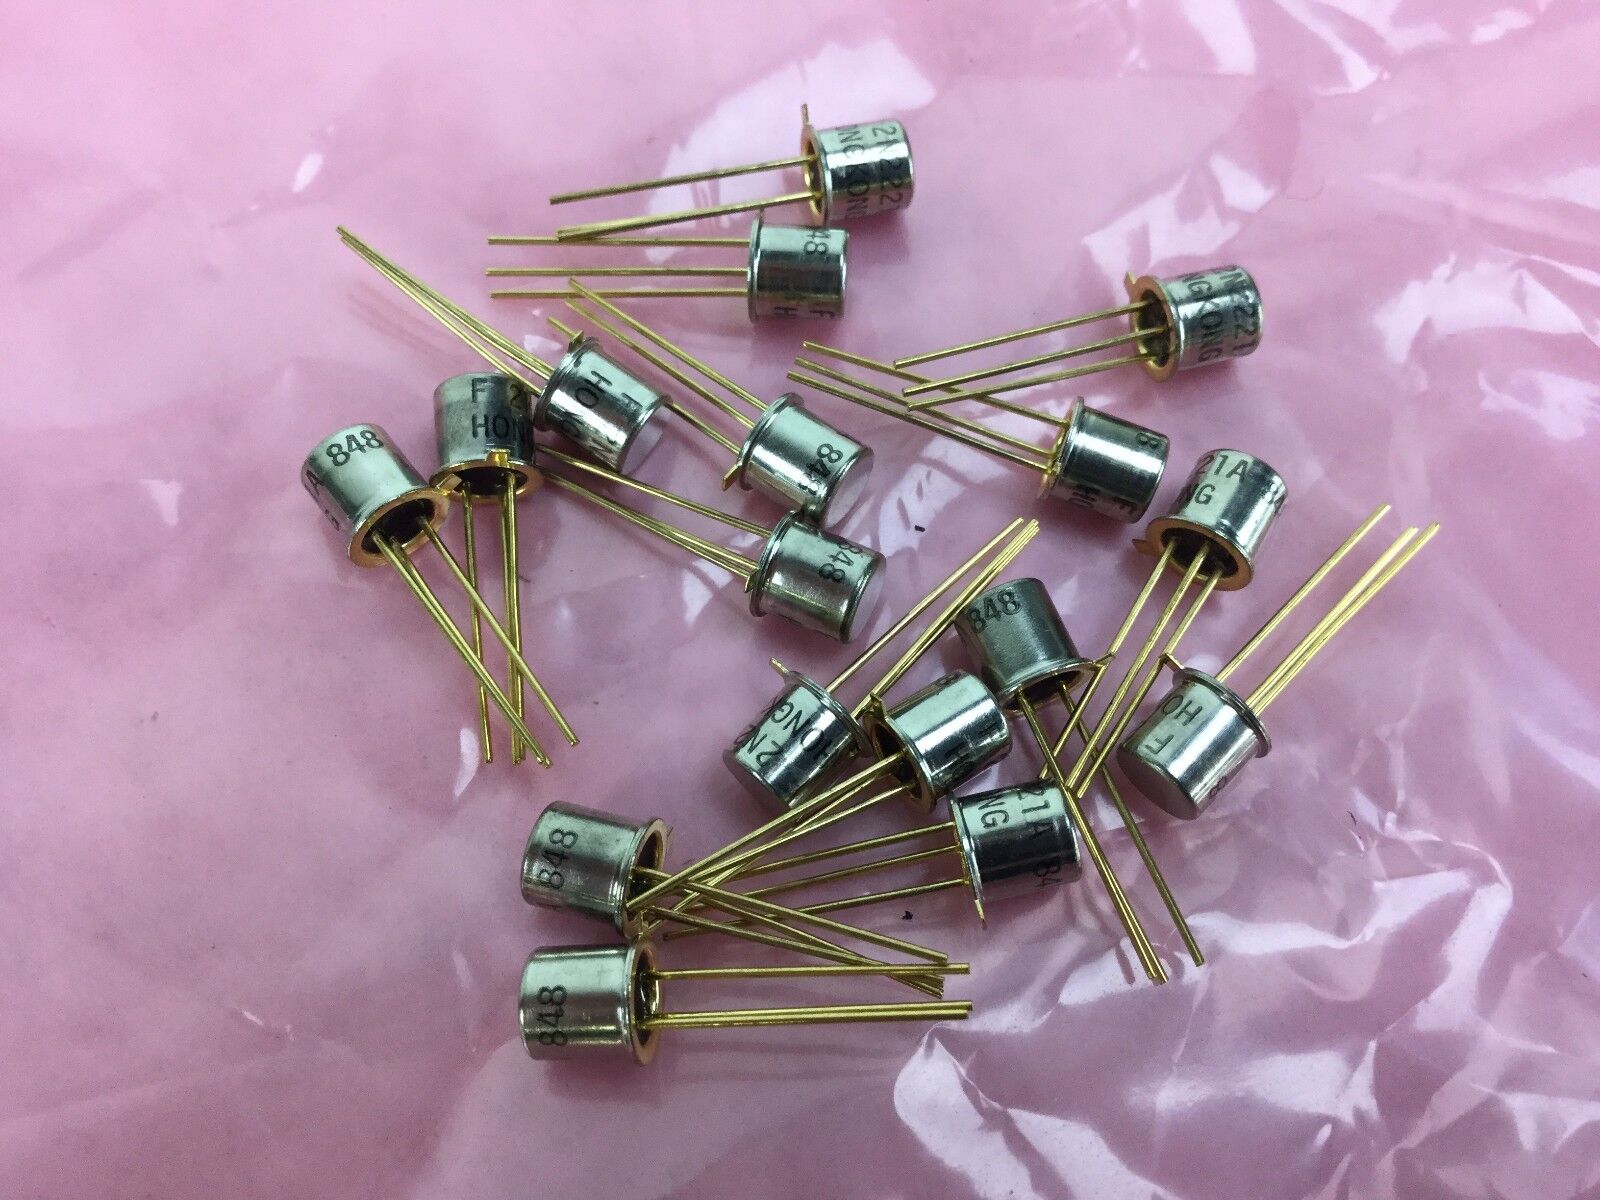 NEW Fairchild 2N2221A Bipolar Transistors - BJT, TO-18, Lot of 17, NEW